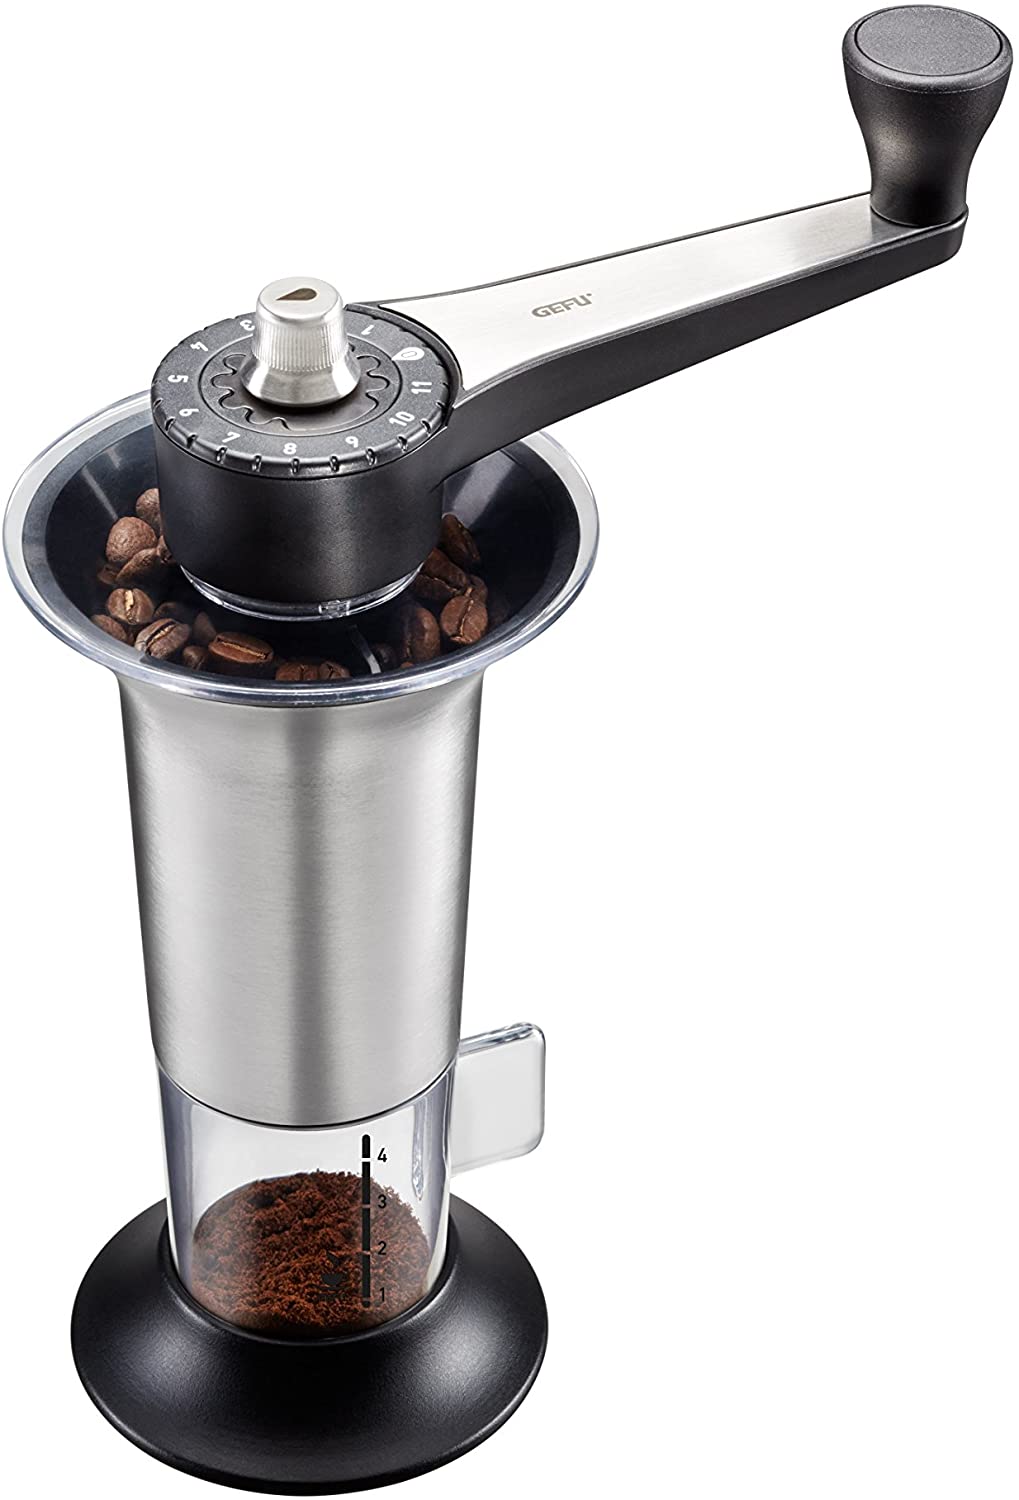 Gefu Lorenzo 16330 Coffee Grinder for Grinding Coffee Beans Stainless Steel for Espresso, Filter Coffee and French Press Coffee